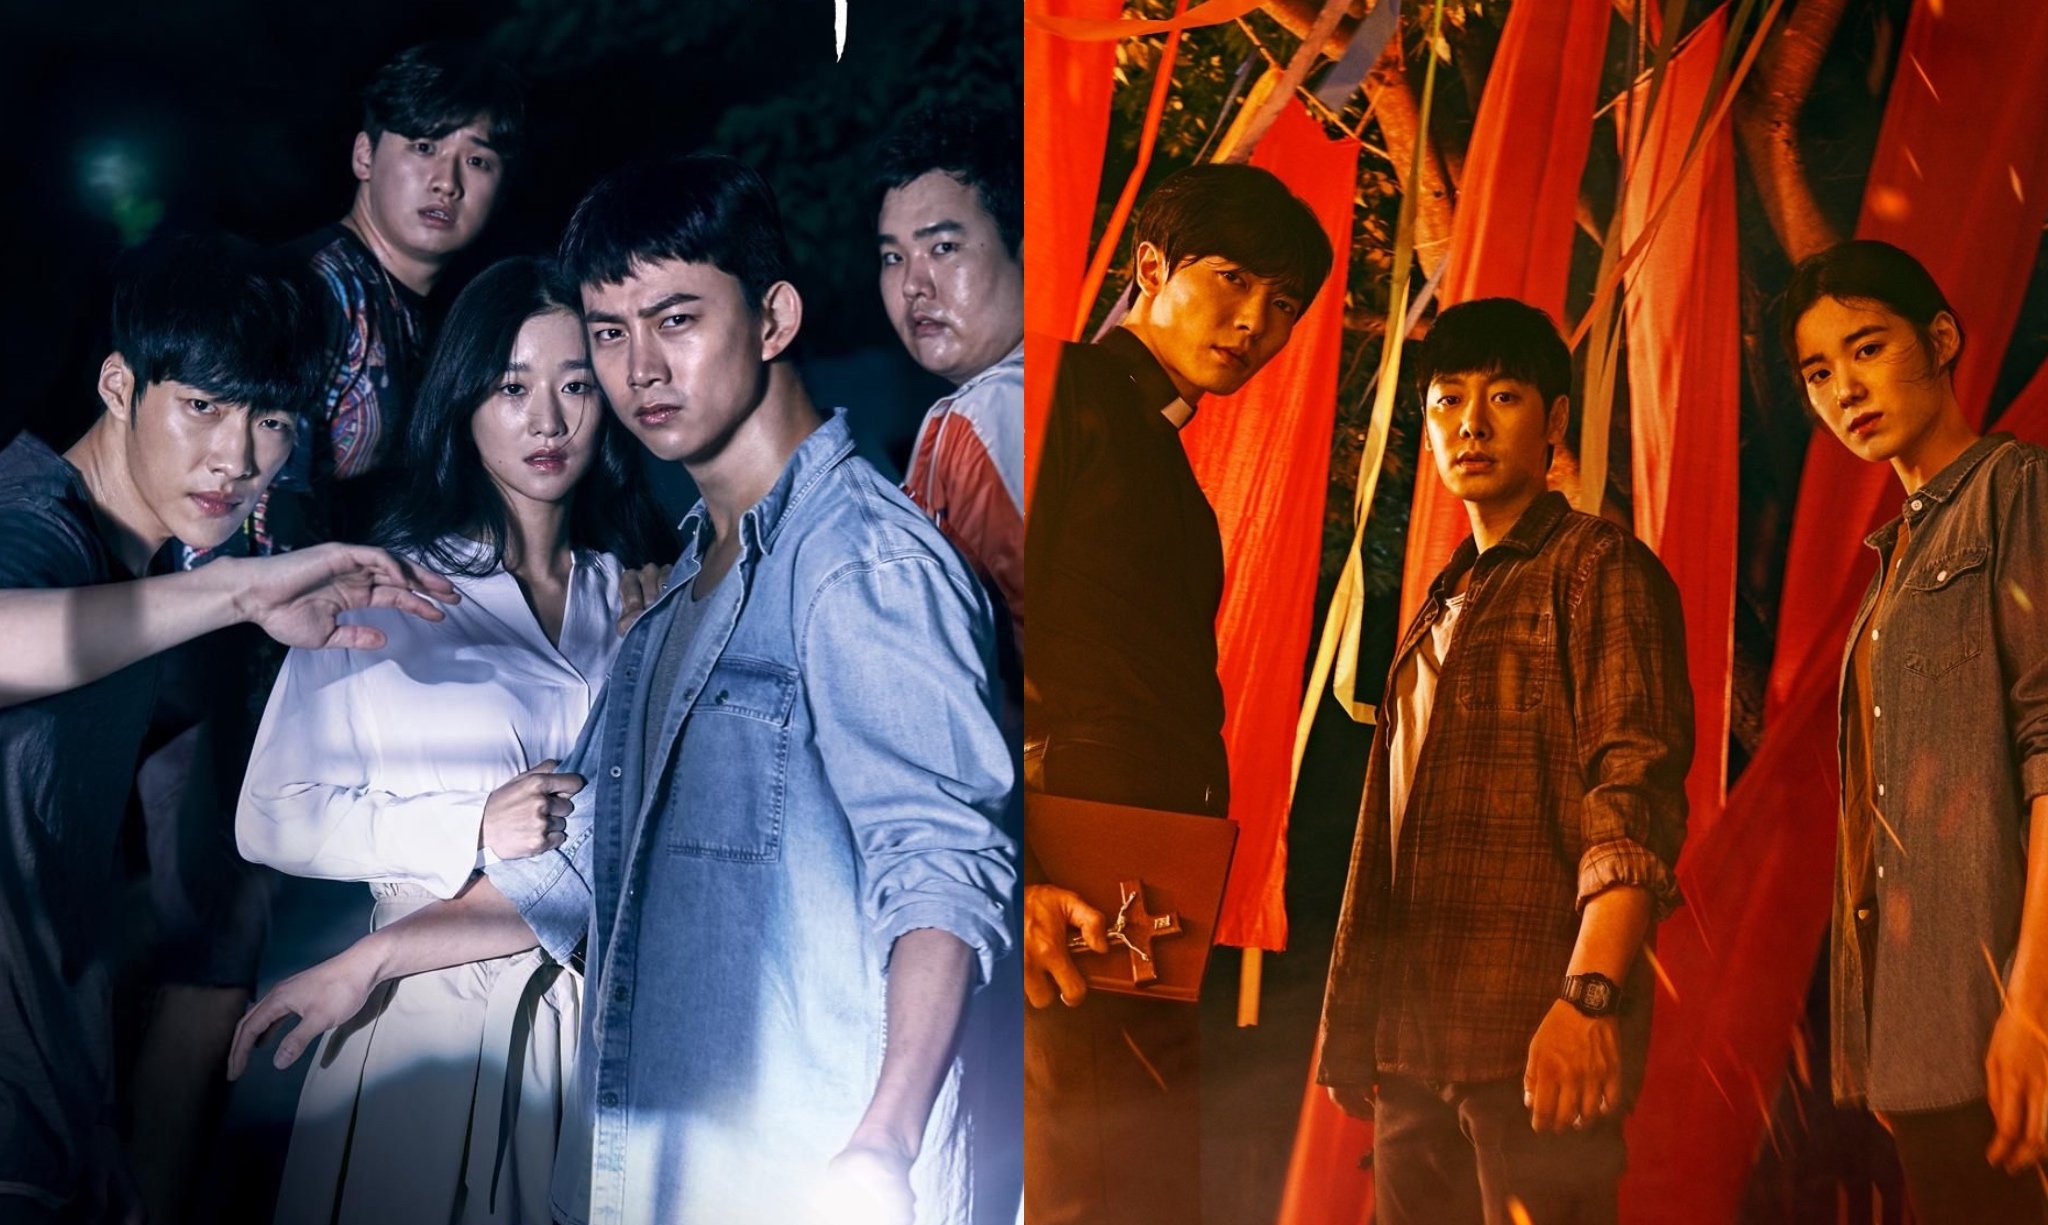 'Save Me' and 'The Guest' horror K-dramas in red and blue official posters.